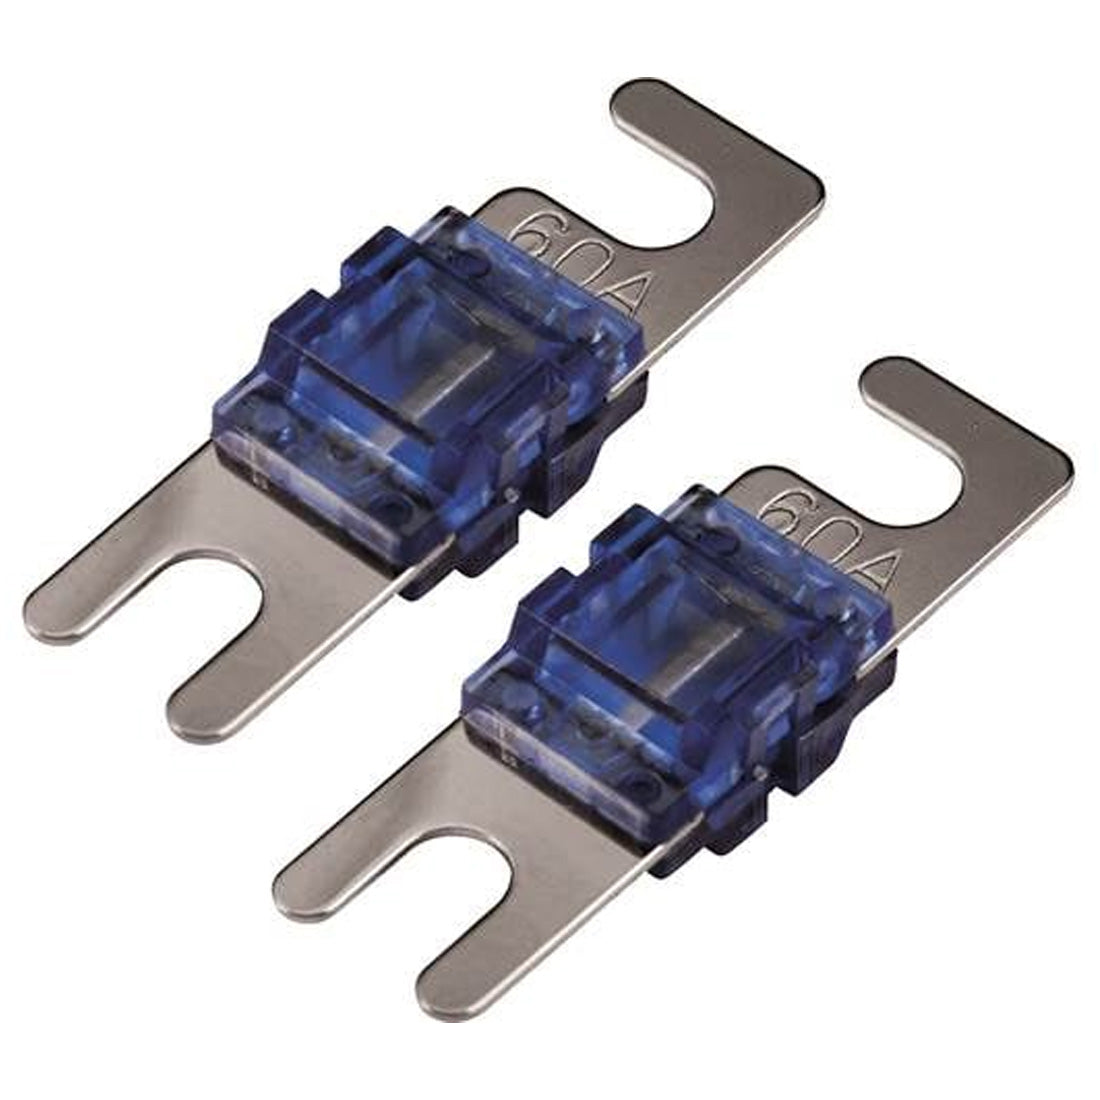 Kicker 46AFS60 Platinum-Plated AFS 60 Amp Fuses - Pair